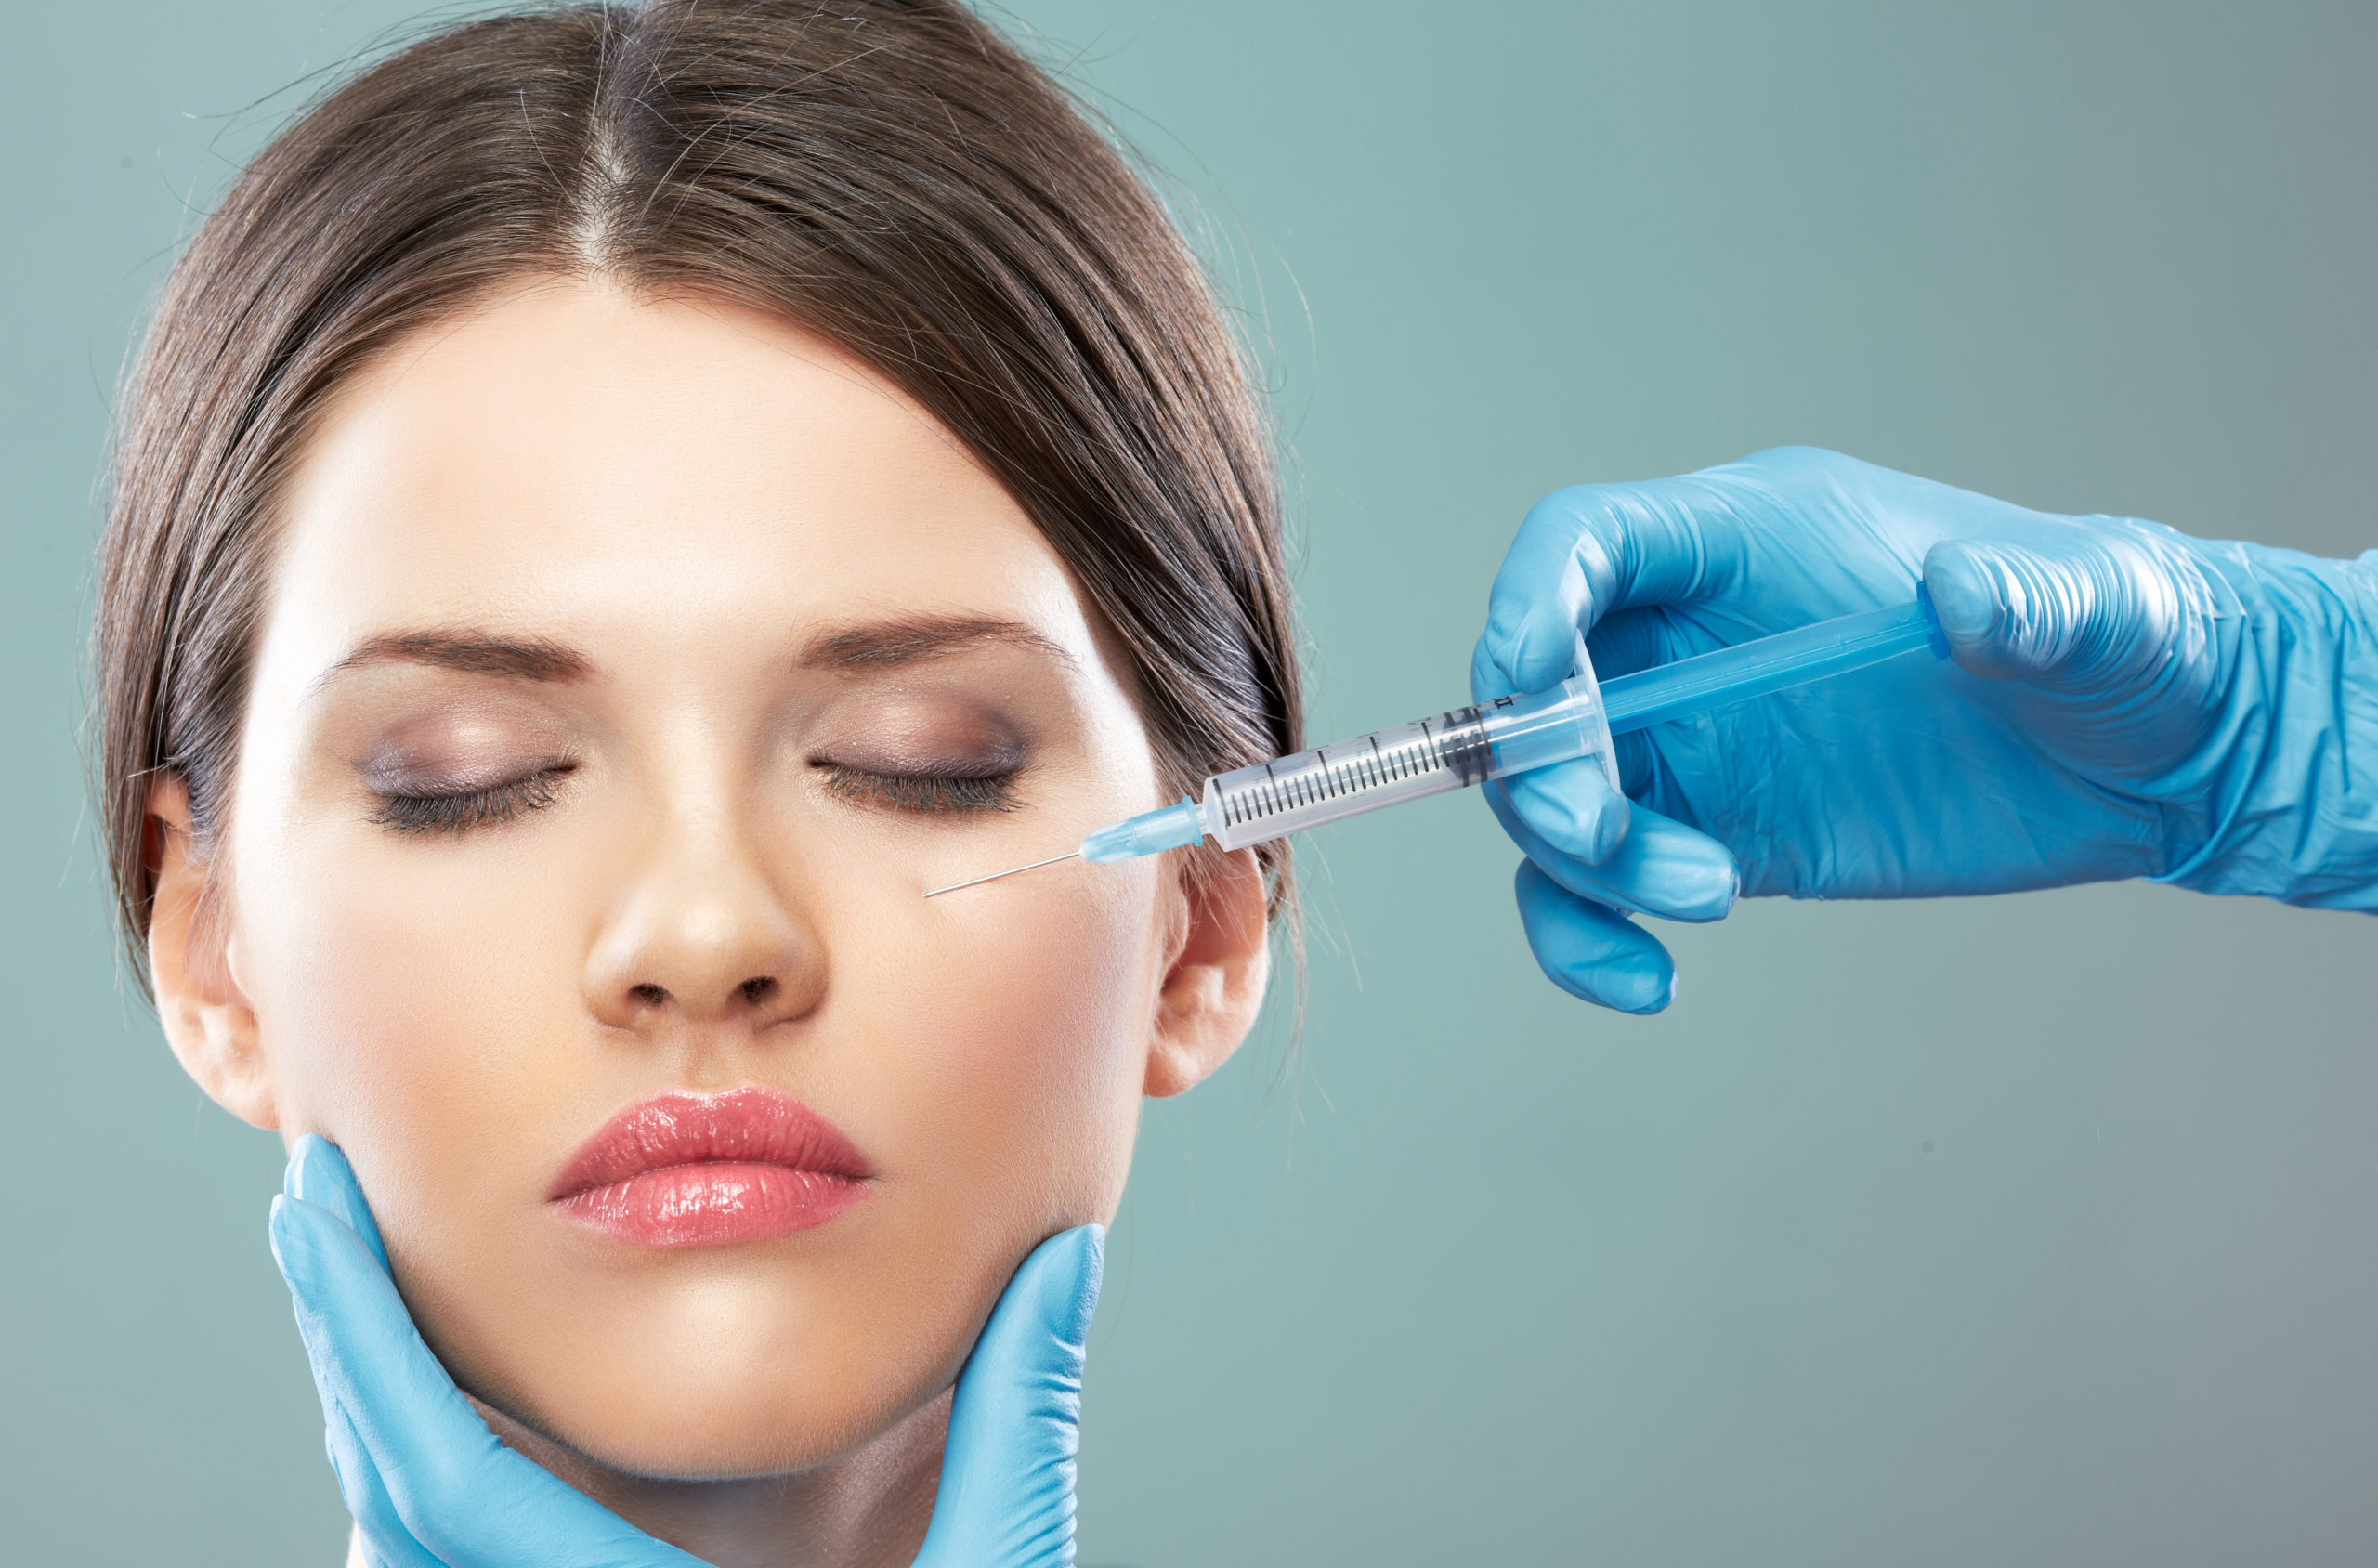 Dermal Fillers: Enhance Your Beauty and Youth